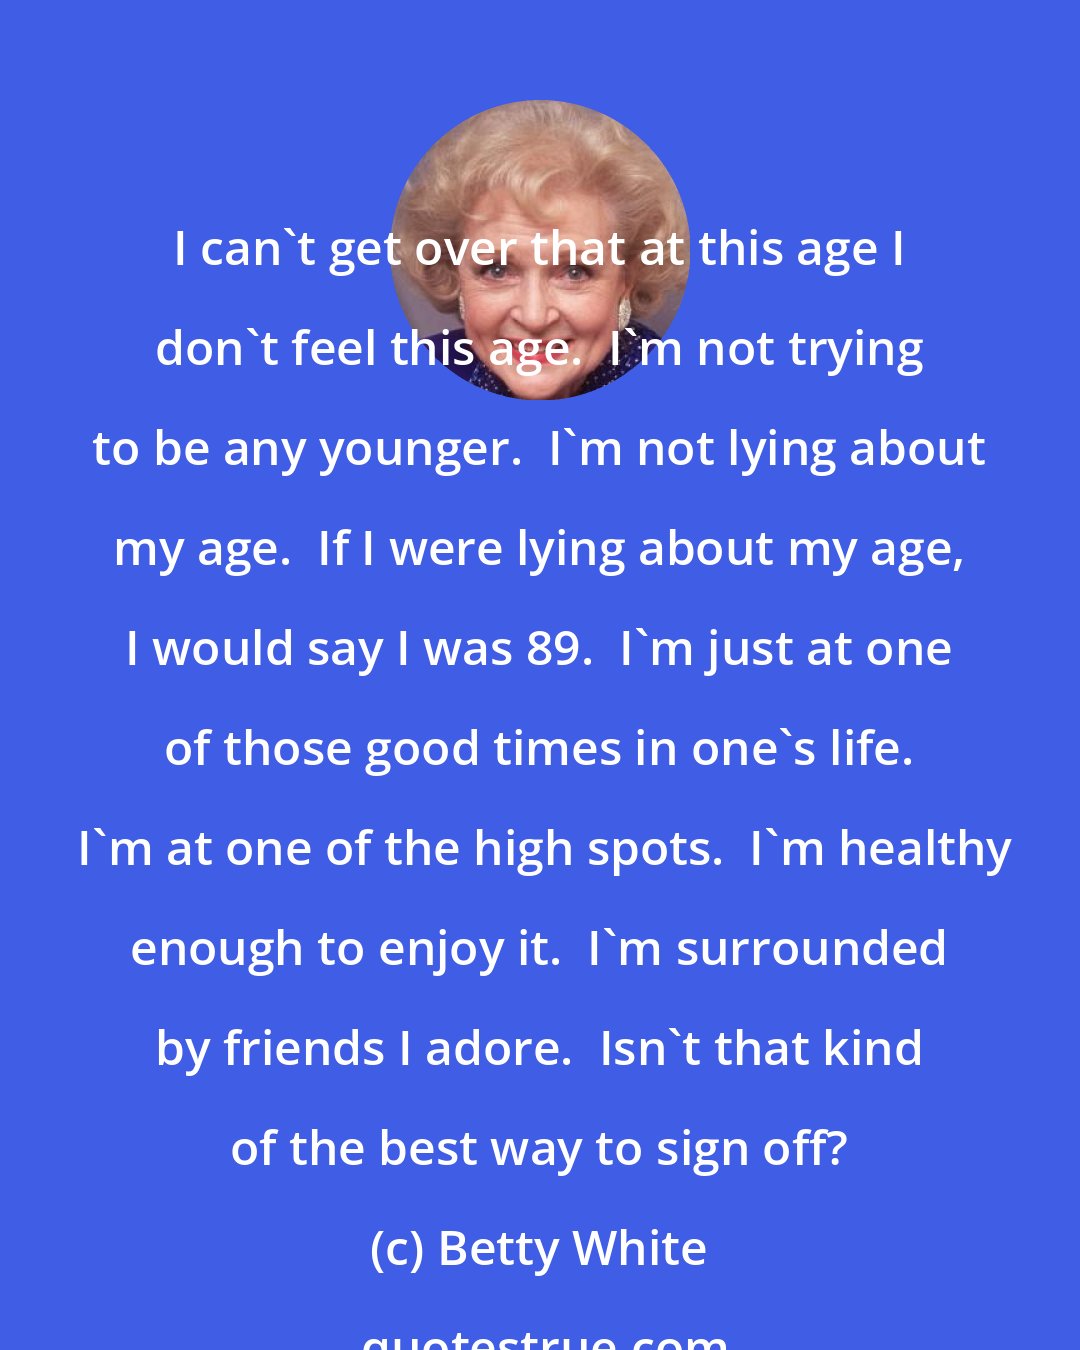 Betty White: I can't get over that at this age I don't feel this age.  I'm not trying to be any younger.  I'm not lying about my age.  If I were lying about my age, I would say I was 89.  I'm just at one of those good times in one's life.  I'm at one of the high spots.  I'm healthy enough to enjoy it.  I'm surrounded by friends I adore.  Isn't that kind of the best way to sign off?